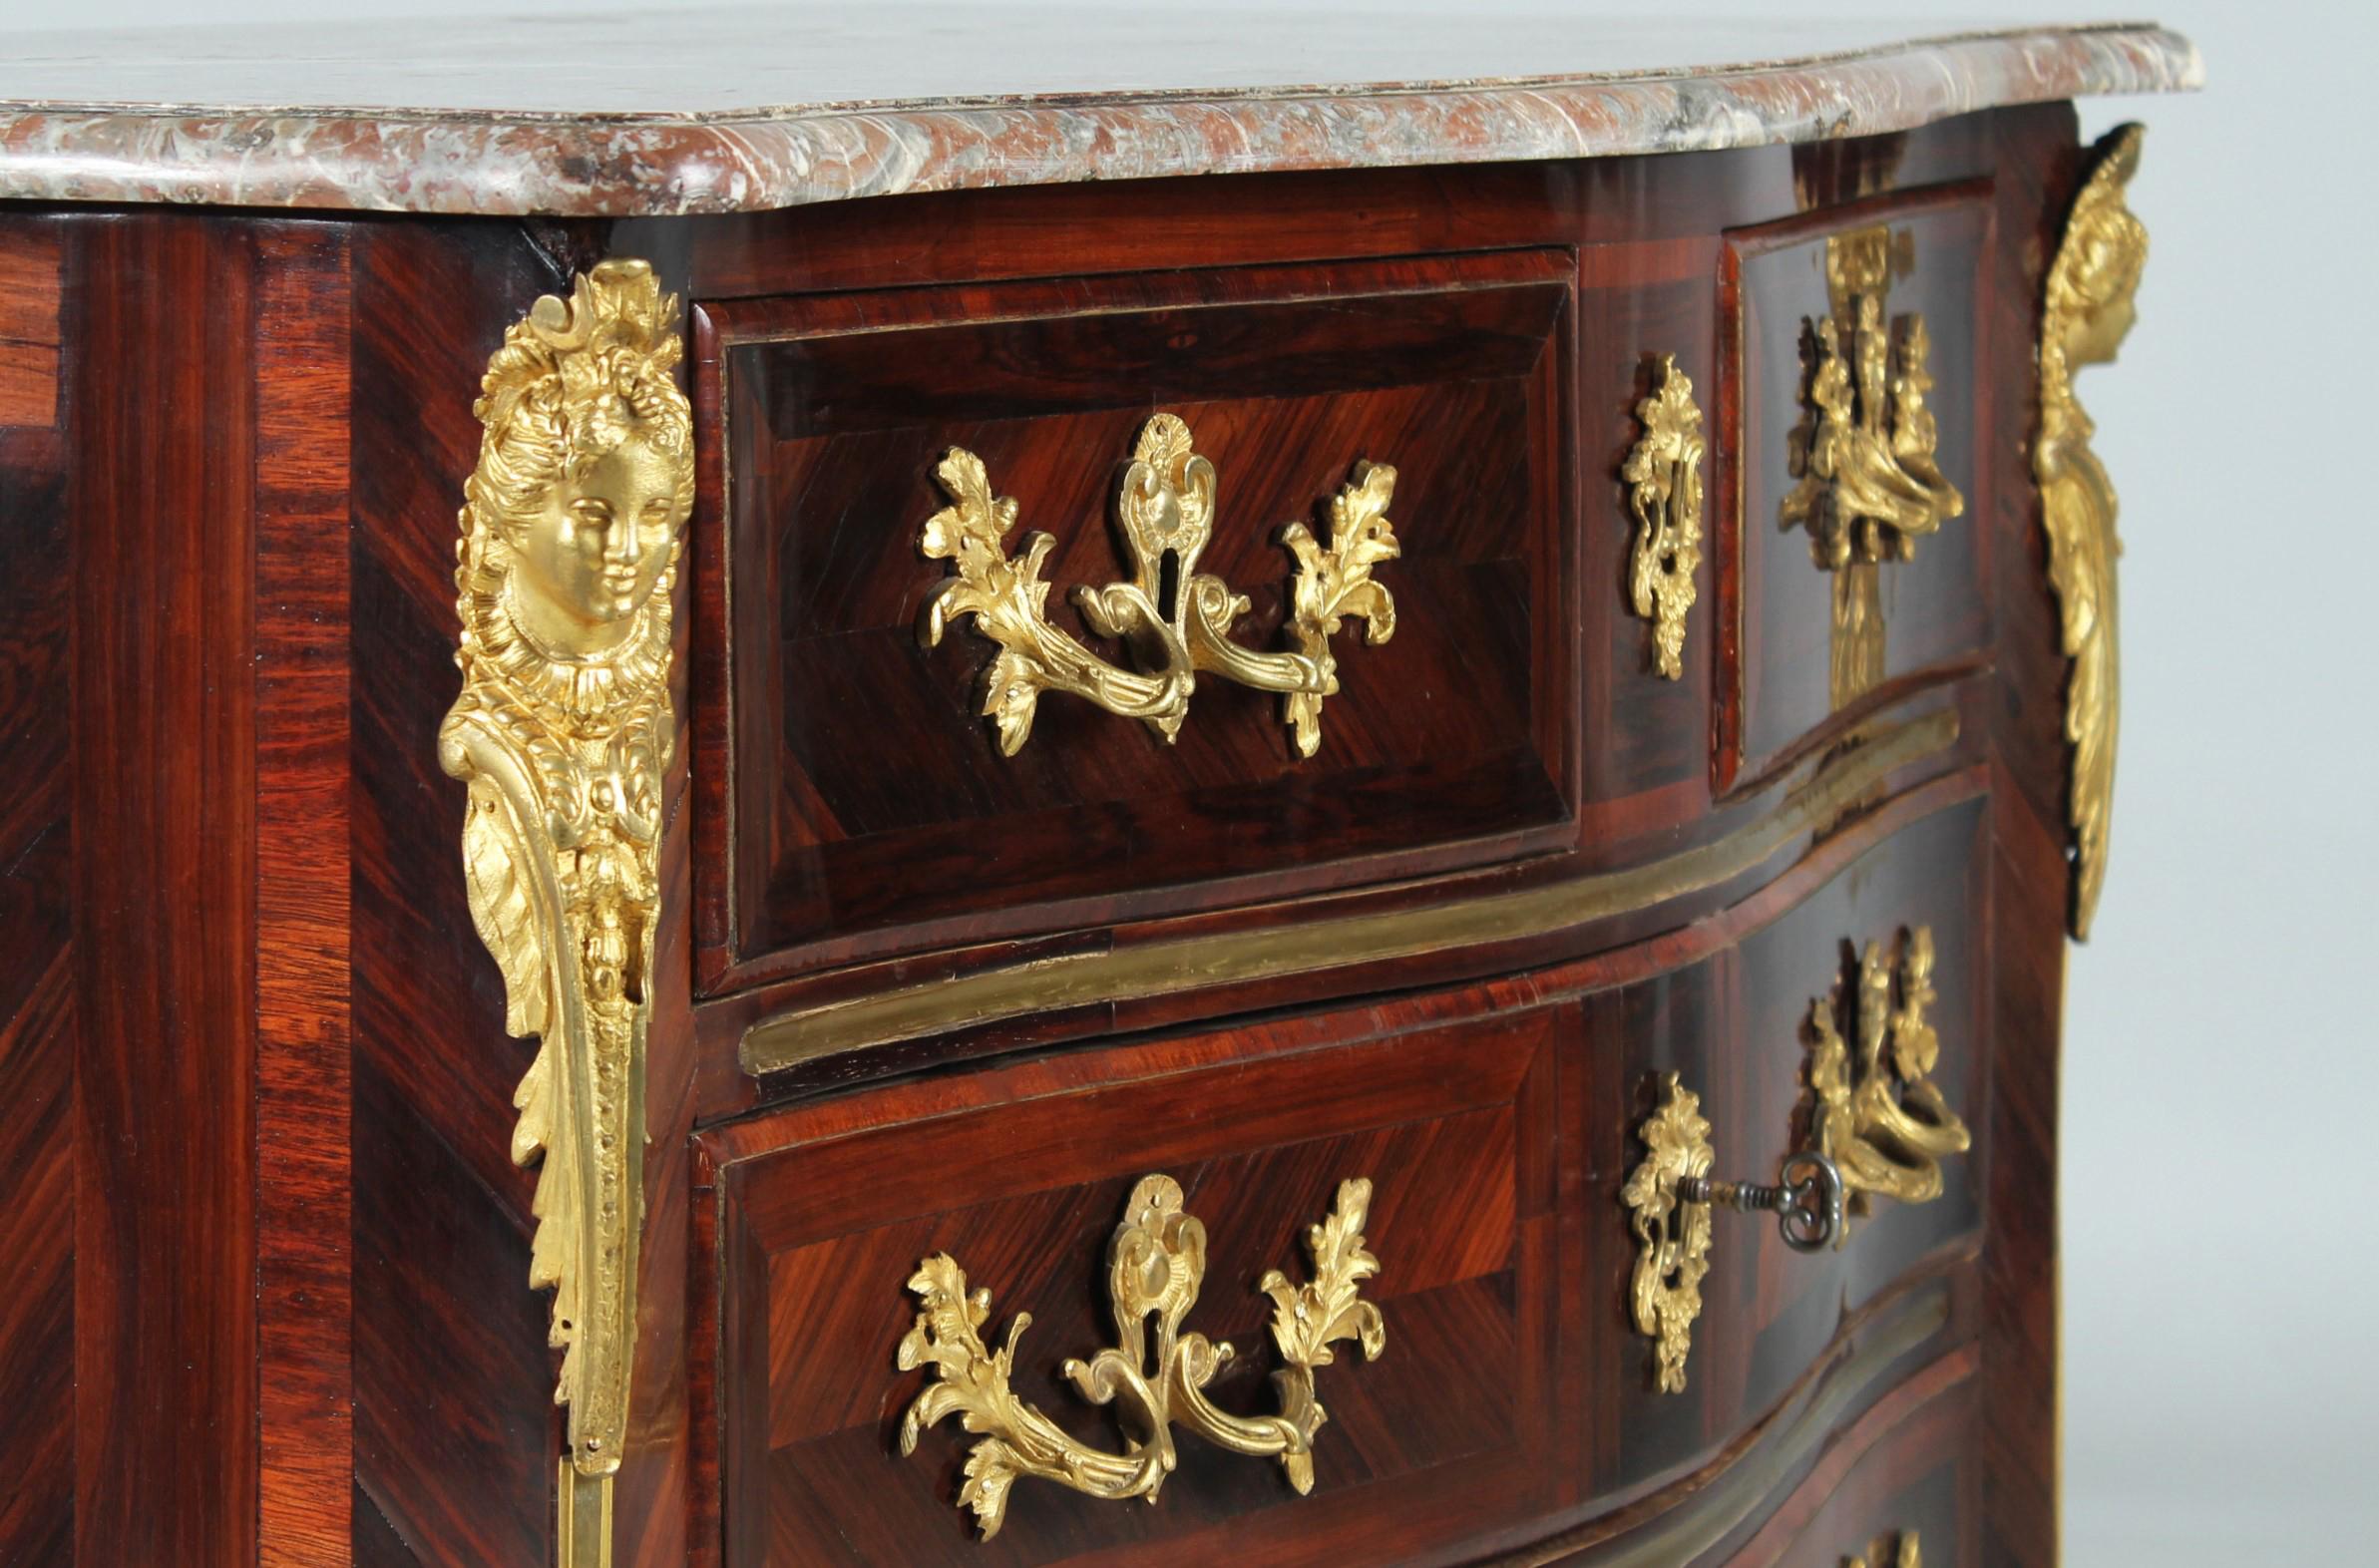 French Regence Chest of Drawers with Ormolu Fittings, Early 18th Century In Good Condition For Sale In Greven, DE